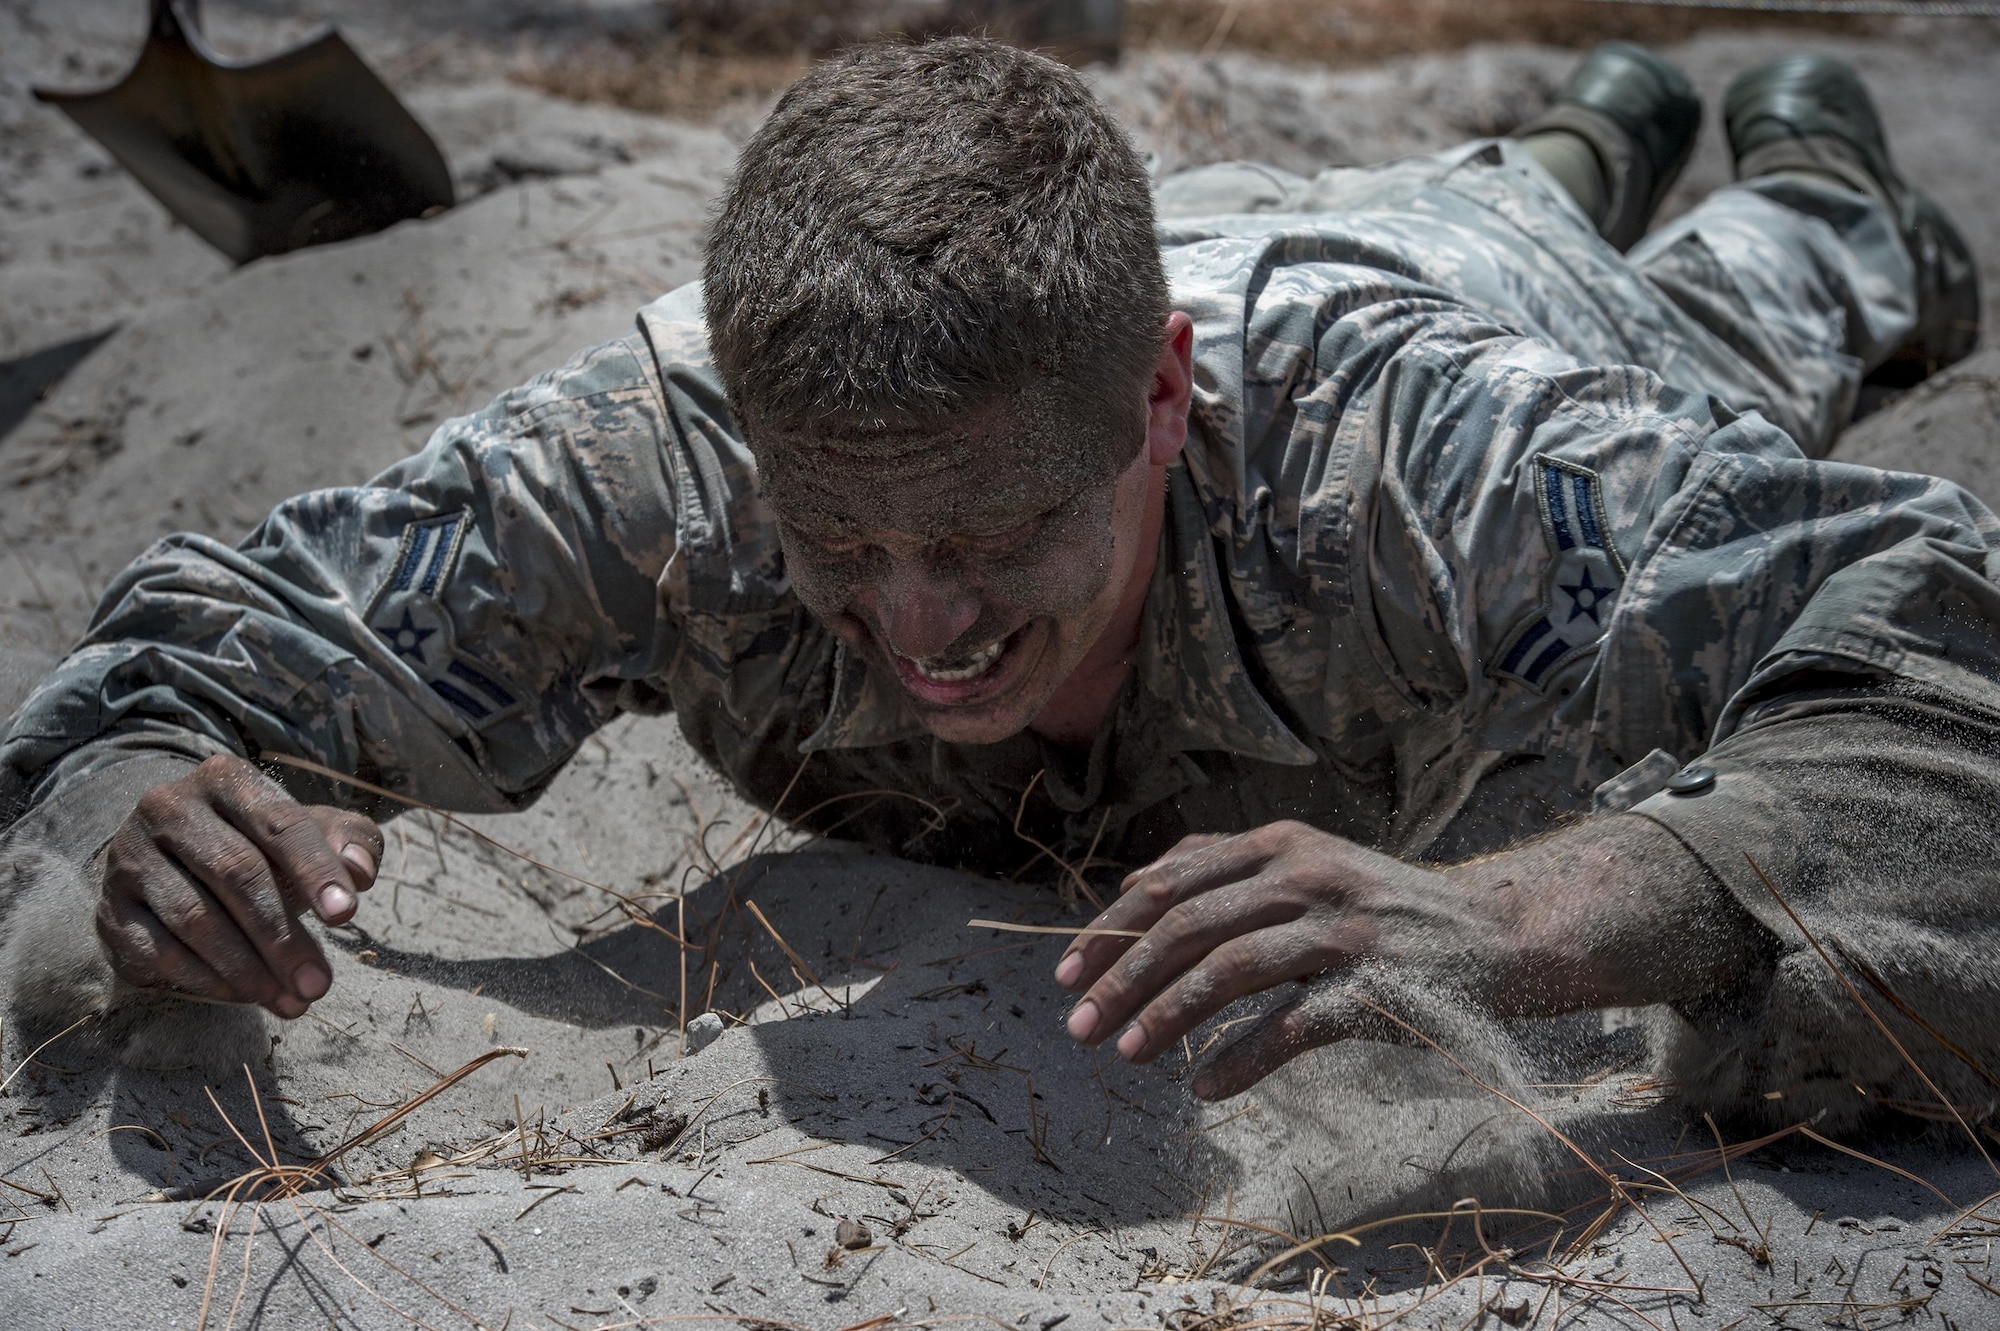 Airman 1st Class Daniel Snider, 23d Wing Public Affairs photojournalist, pulls himself through a low-crawl obstacle during an Army Air Assault assessment, May 18, 2017, at Camp Blanding, Fla. Twenty-six Airmen attended the assessment which measured candidates’ aptitude in Air Assault operations, completion of equipment layouts, and rappelling. (U.S. Air Force photo by Tech. Sgt. Zachary Wolf)